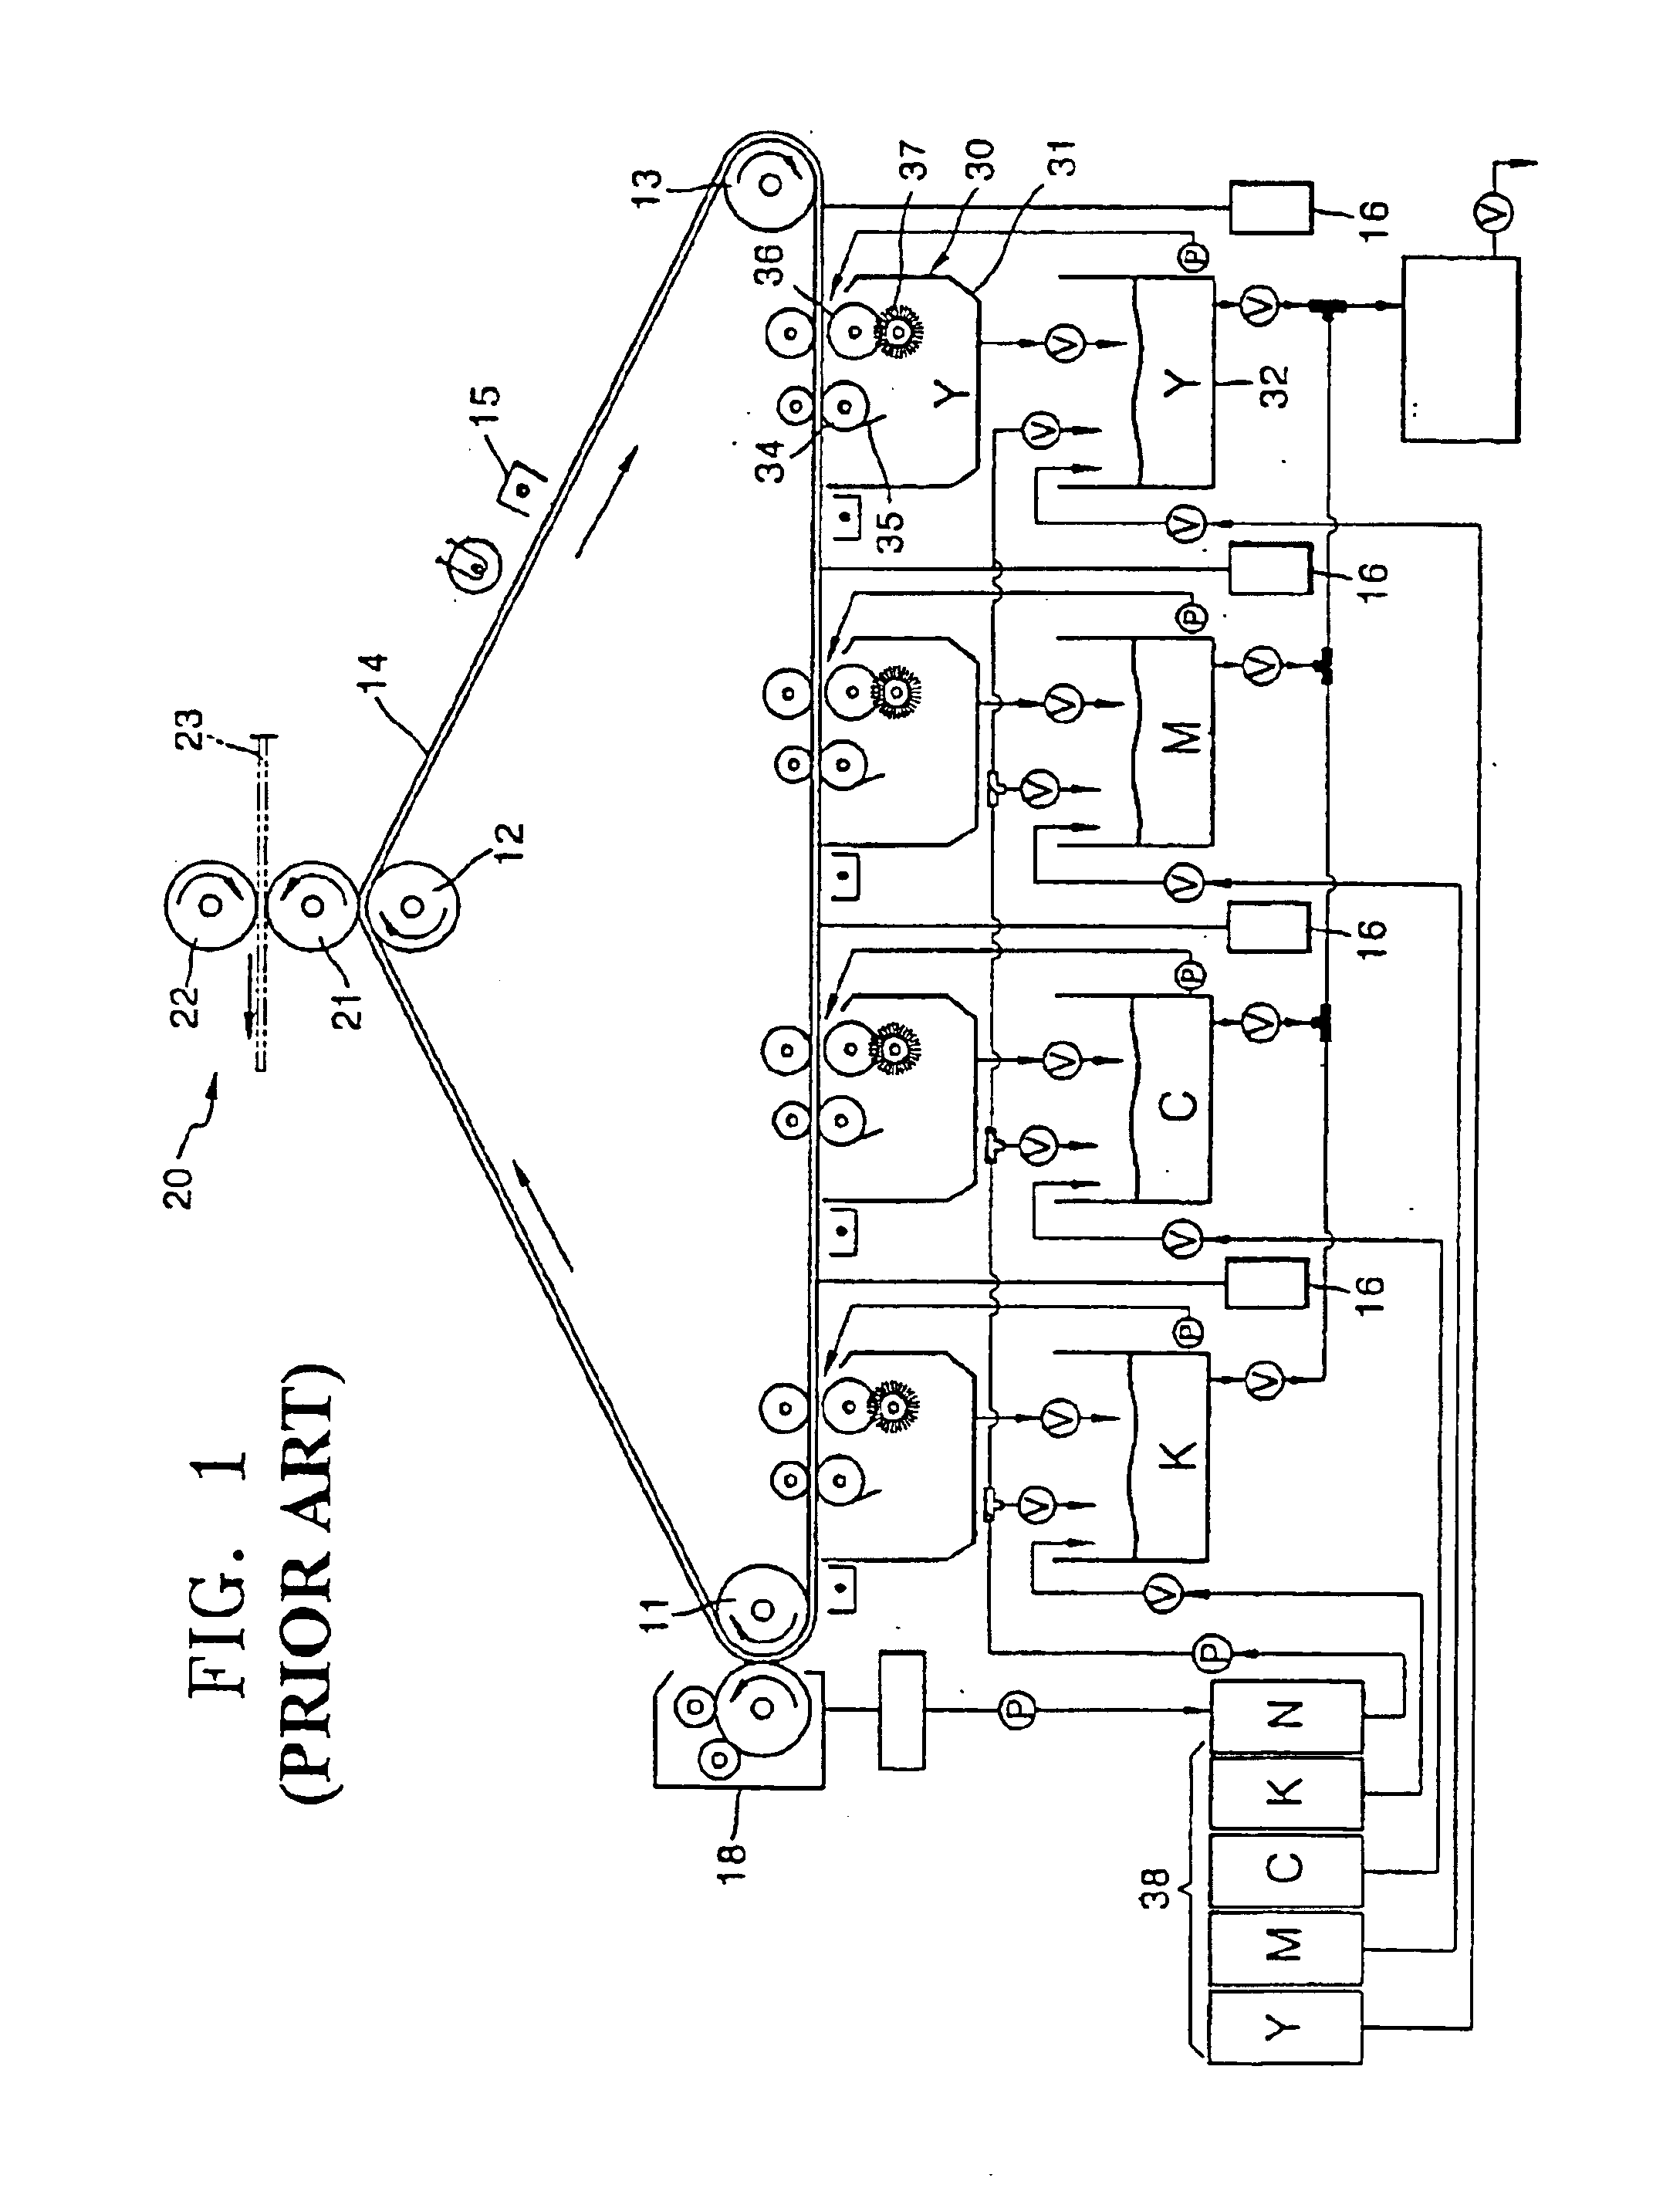 Method of determining time to replace developing solution of printer